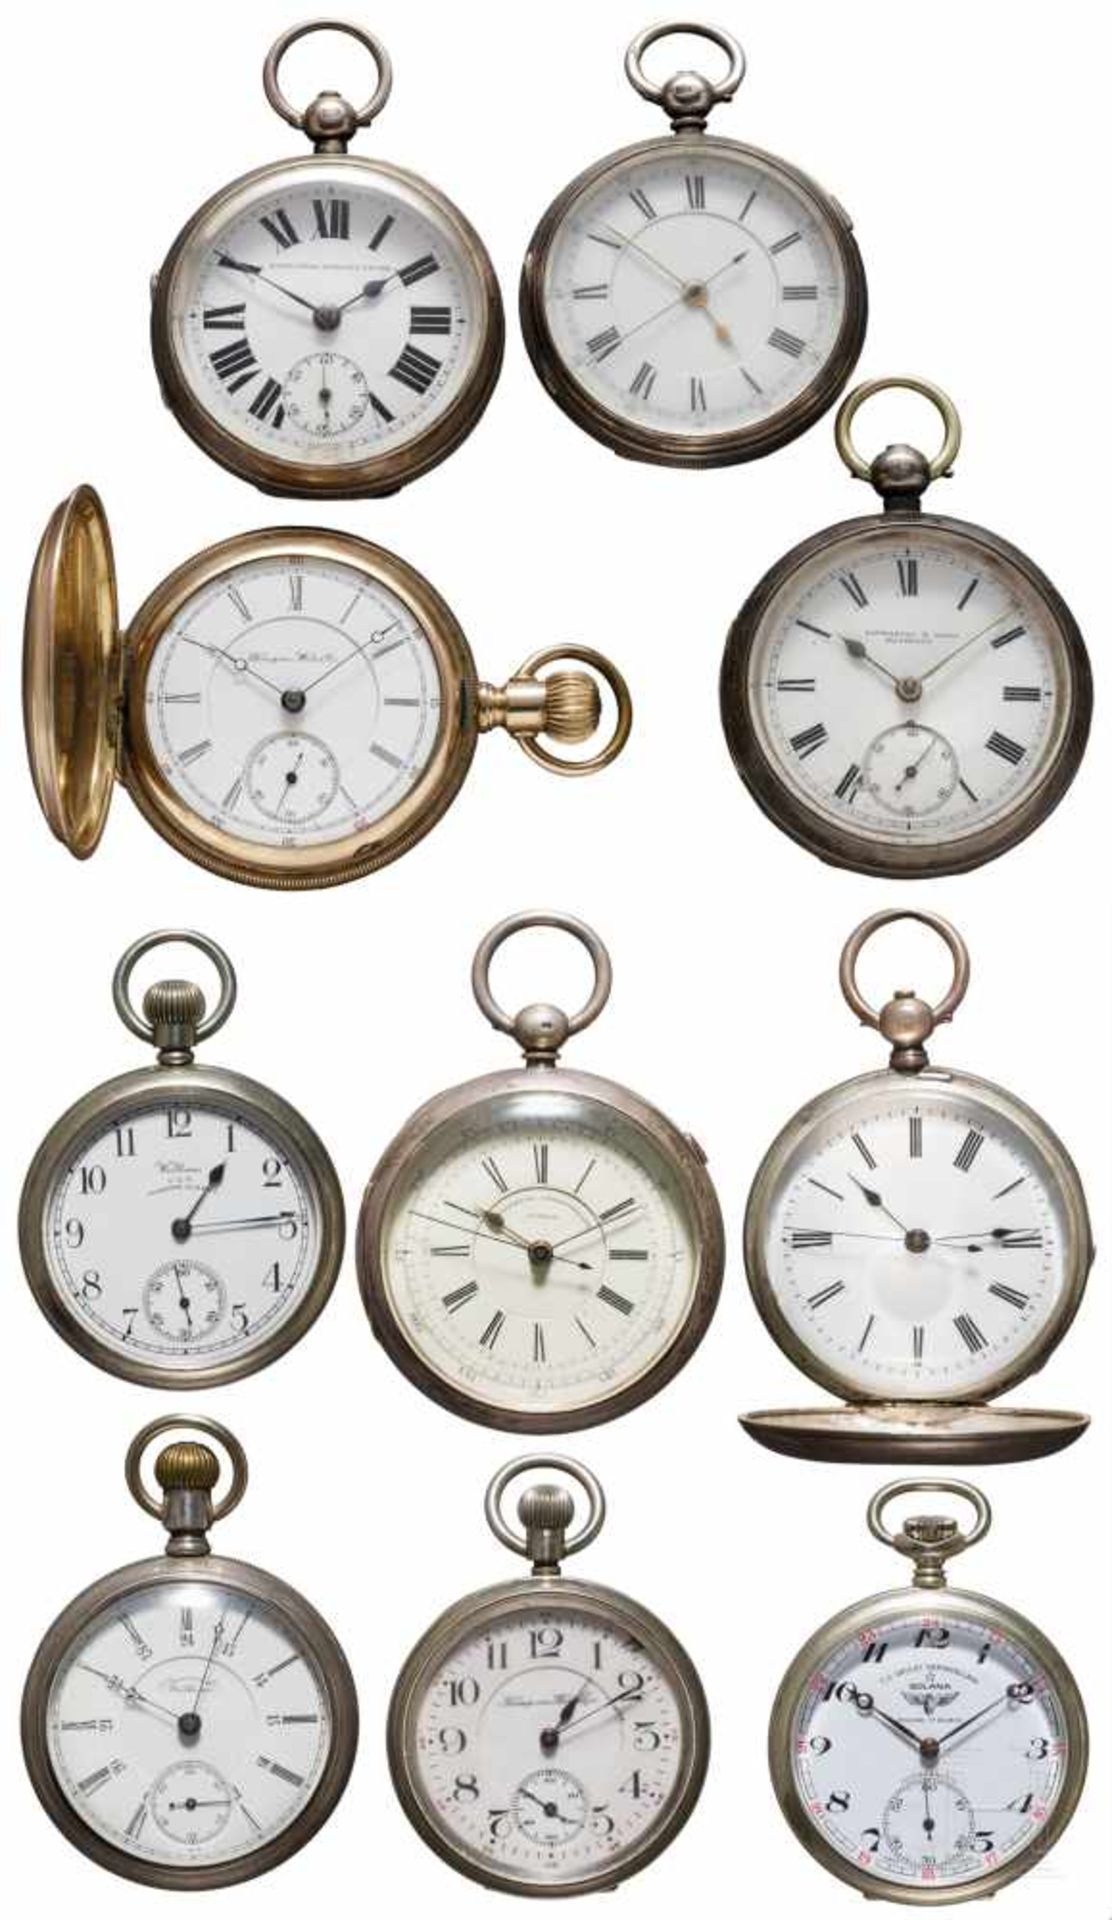 Ten pocket watchesVarious makers and models, manual winding or by key. Diameters 50 - 54 mm.